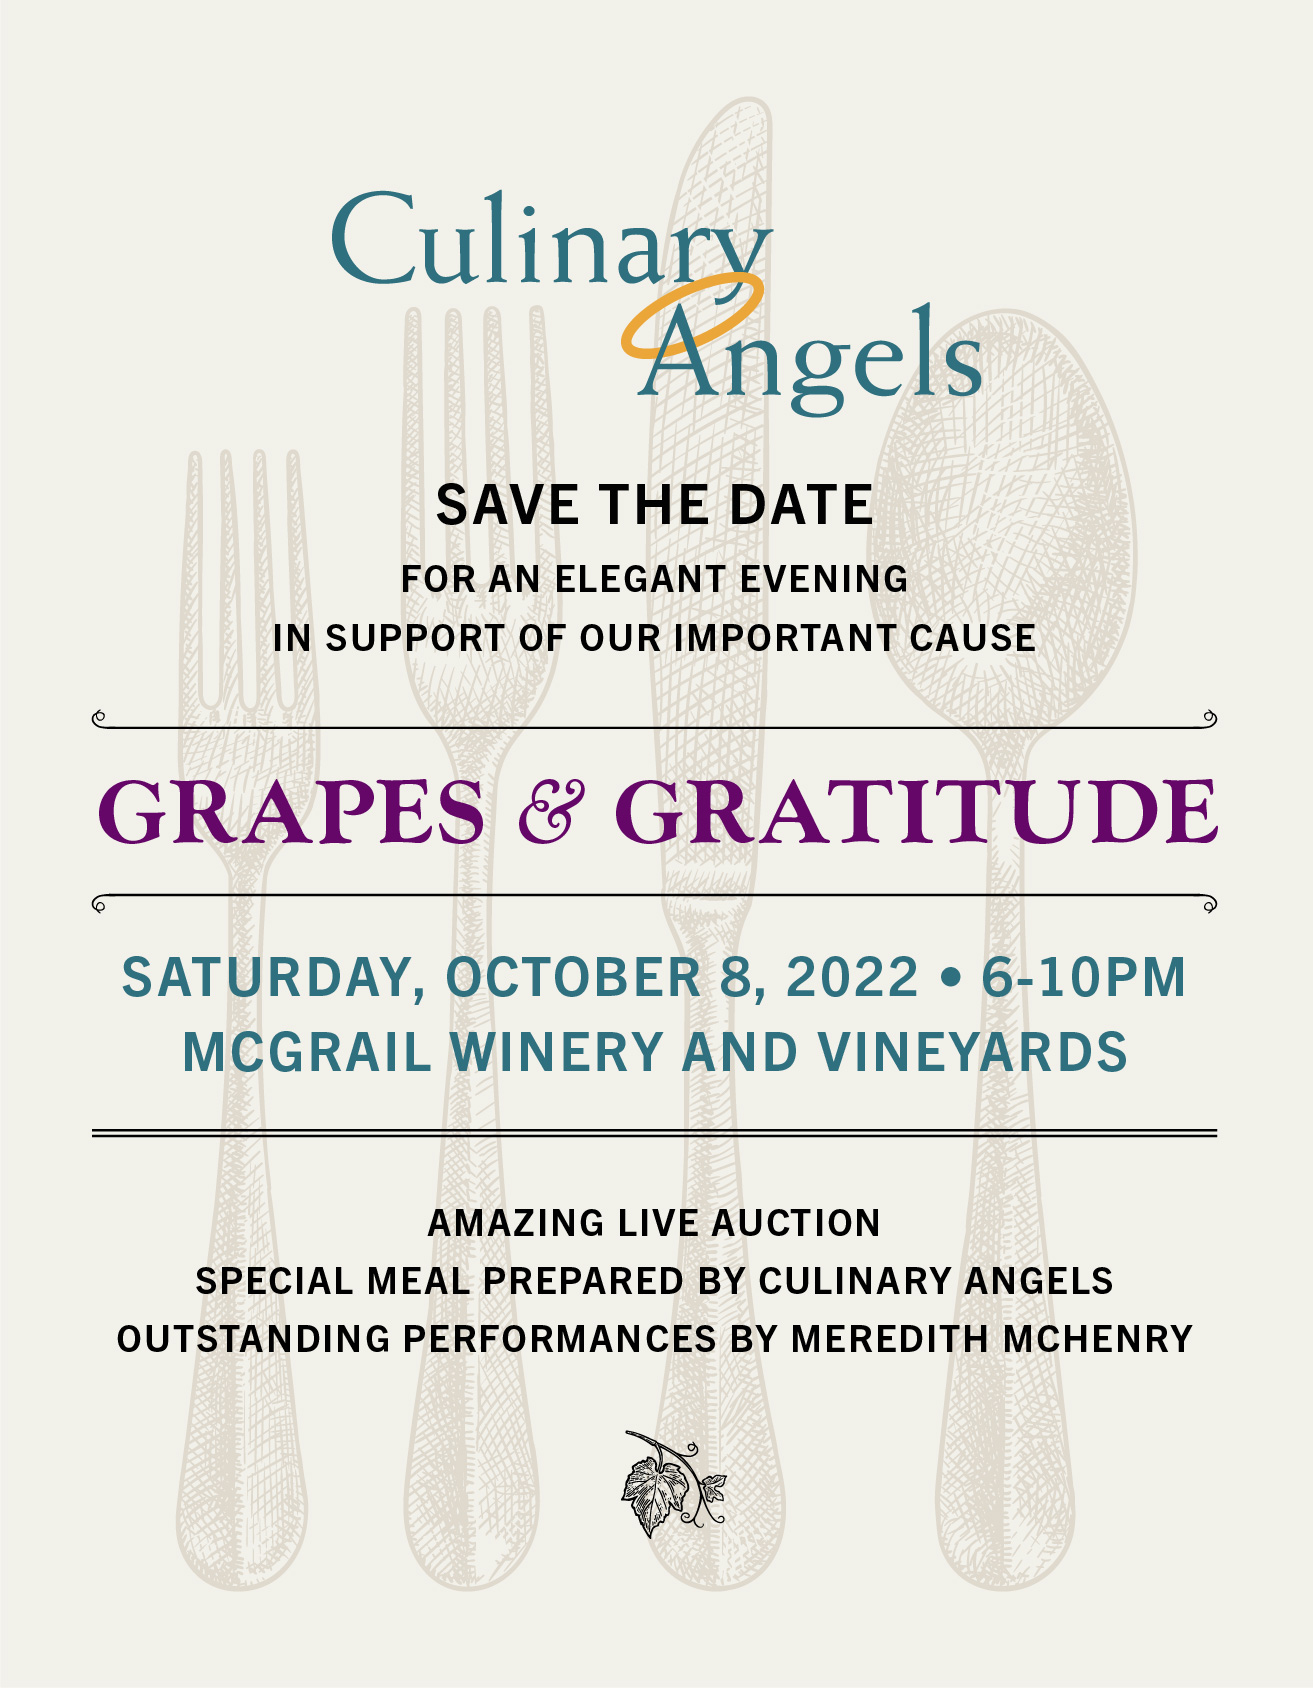 Grapes & Gratitude Save the Date